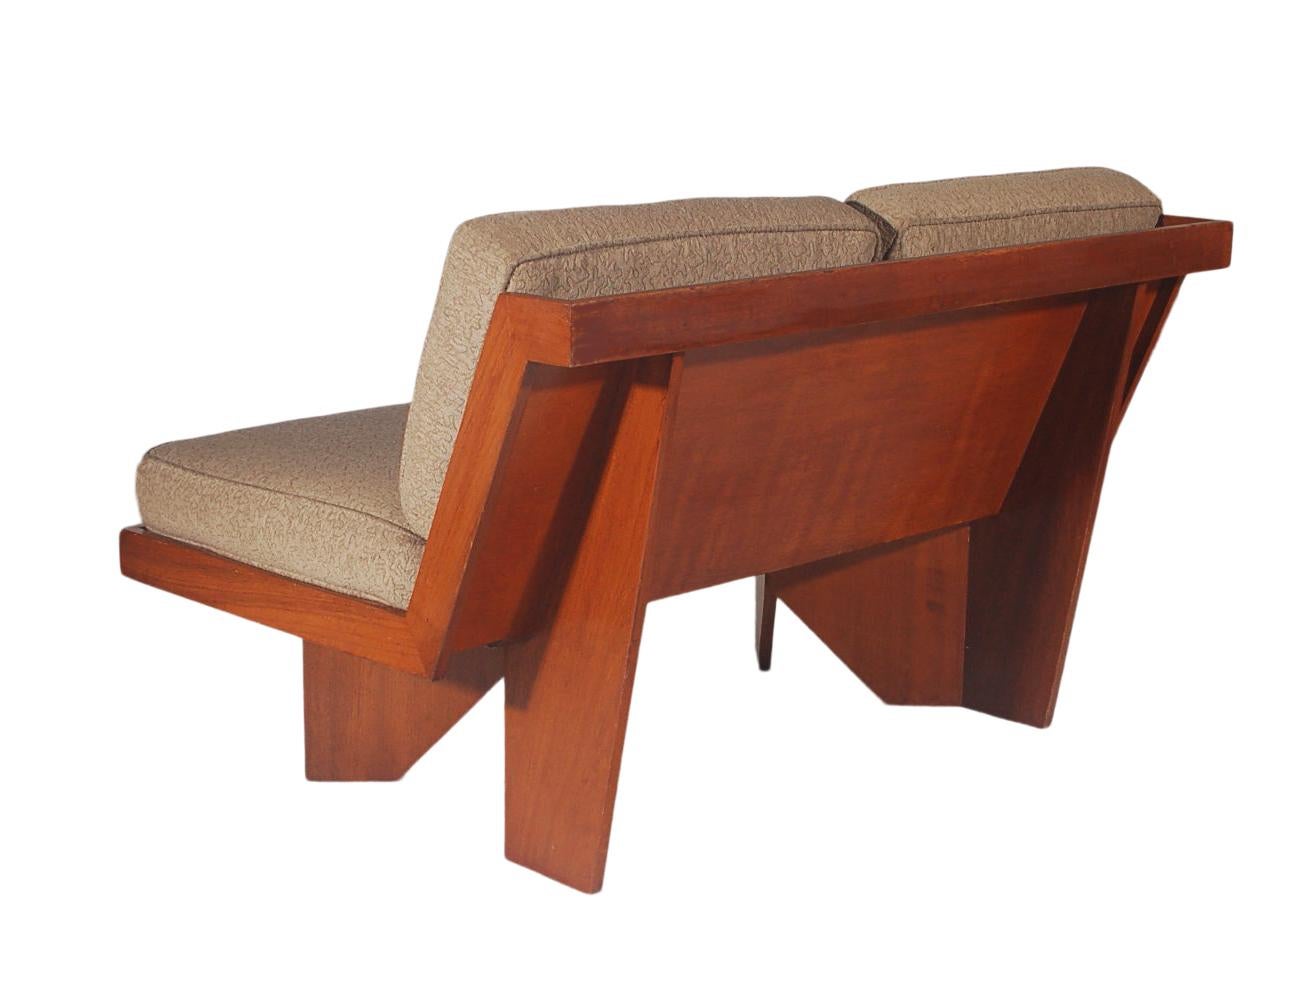 Midcentury Craftsman Modern Plywood Loveseat or Sofa after Frank Lloyd Wright In Good Condition For Sale In Philadelphia, PA